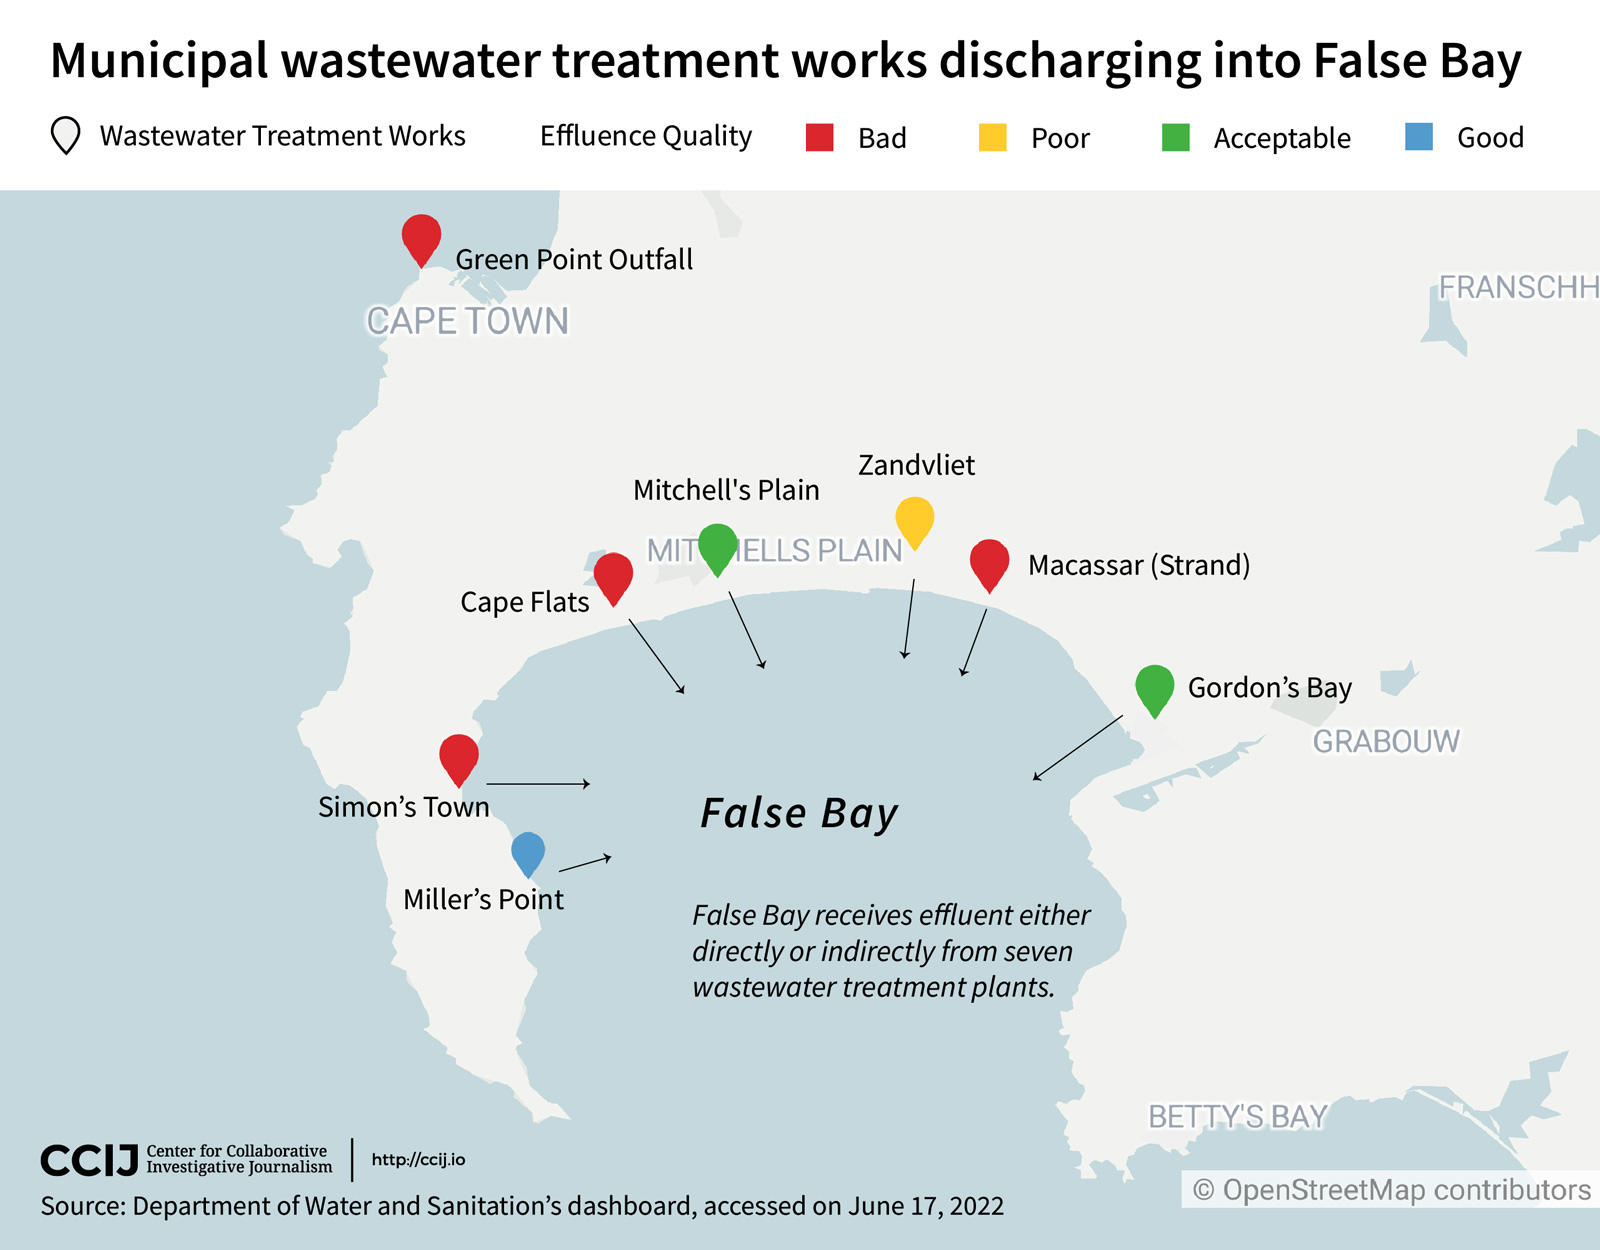 Municipal wastewater treatment works discharging into False Bay.